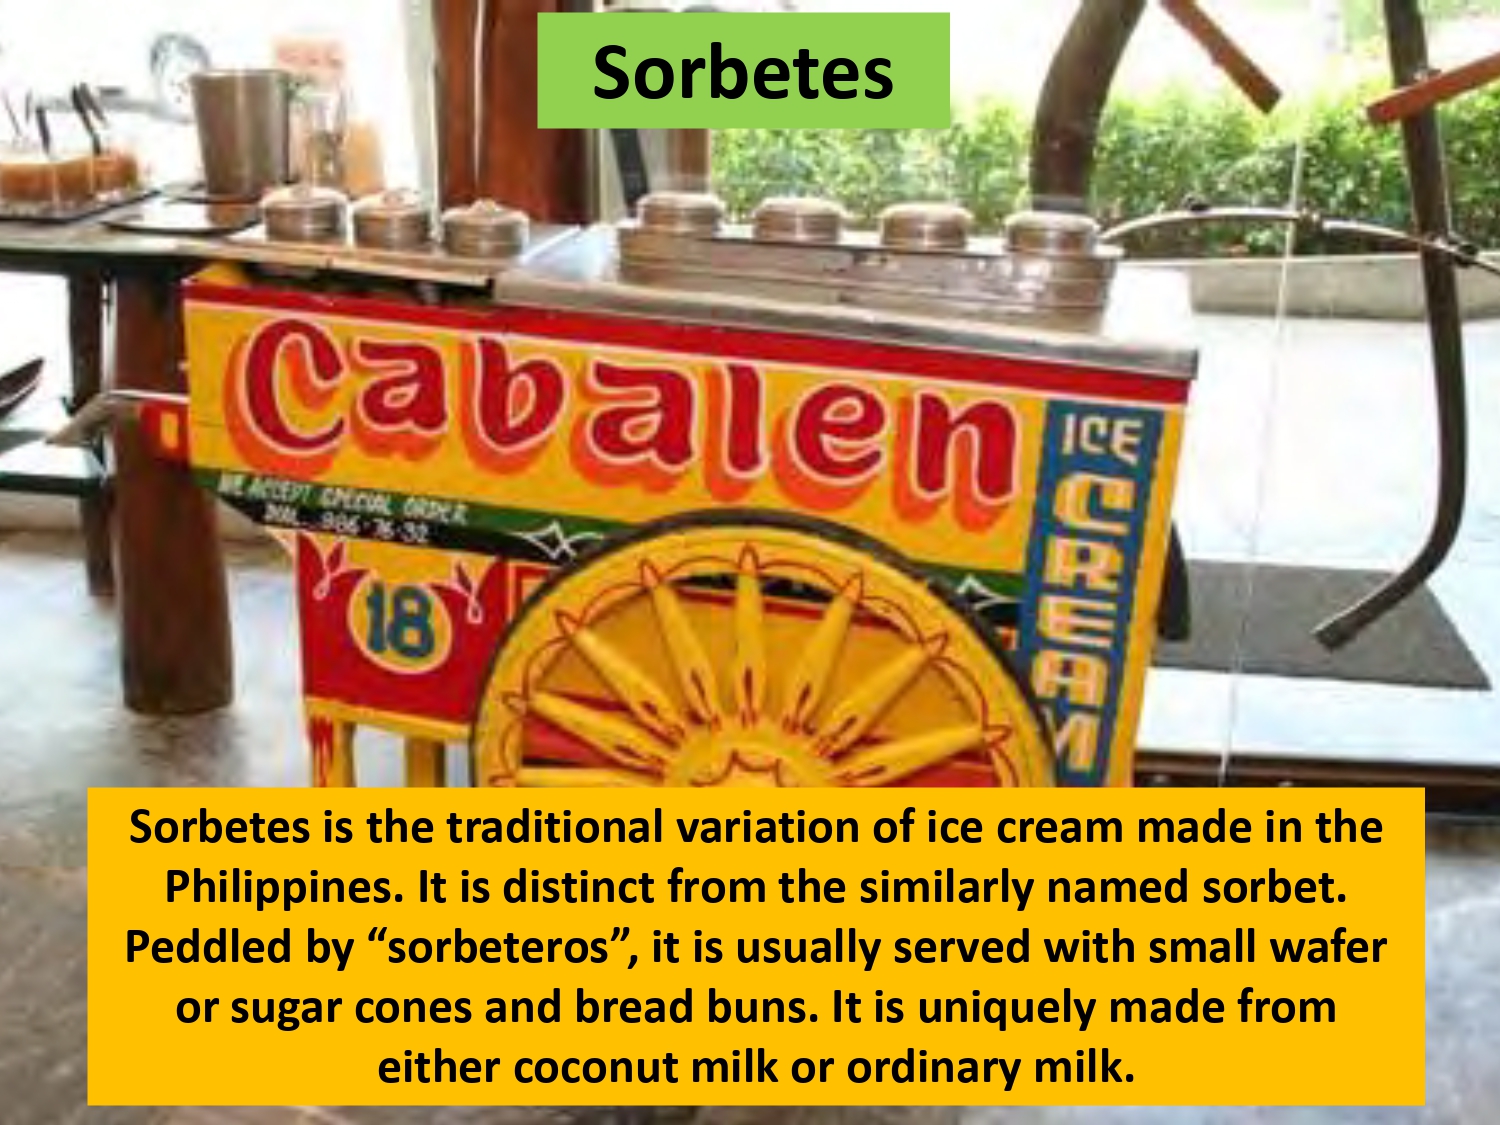 Sorbetes is the traditional variation of ice cream made in the Philippines. It is distinct from the similarly named sorbet. Peddled by “sorbeteros”, it is usually served with small wafer or sugar cones and bread buns. It is uniquely made from either coconut milk or ordinary milk.